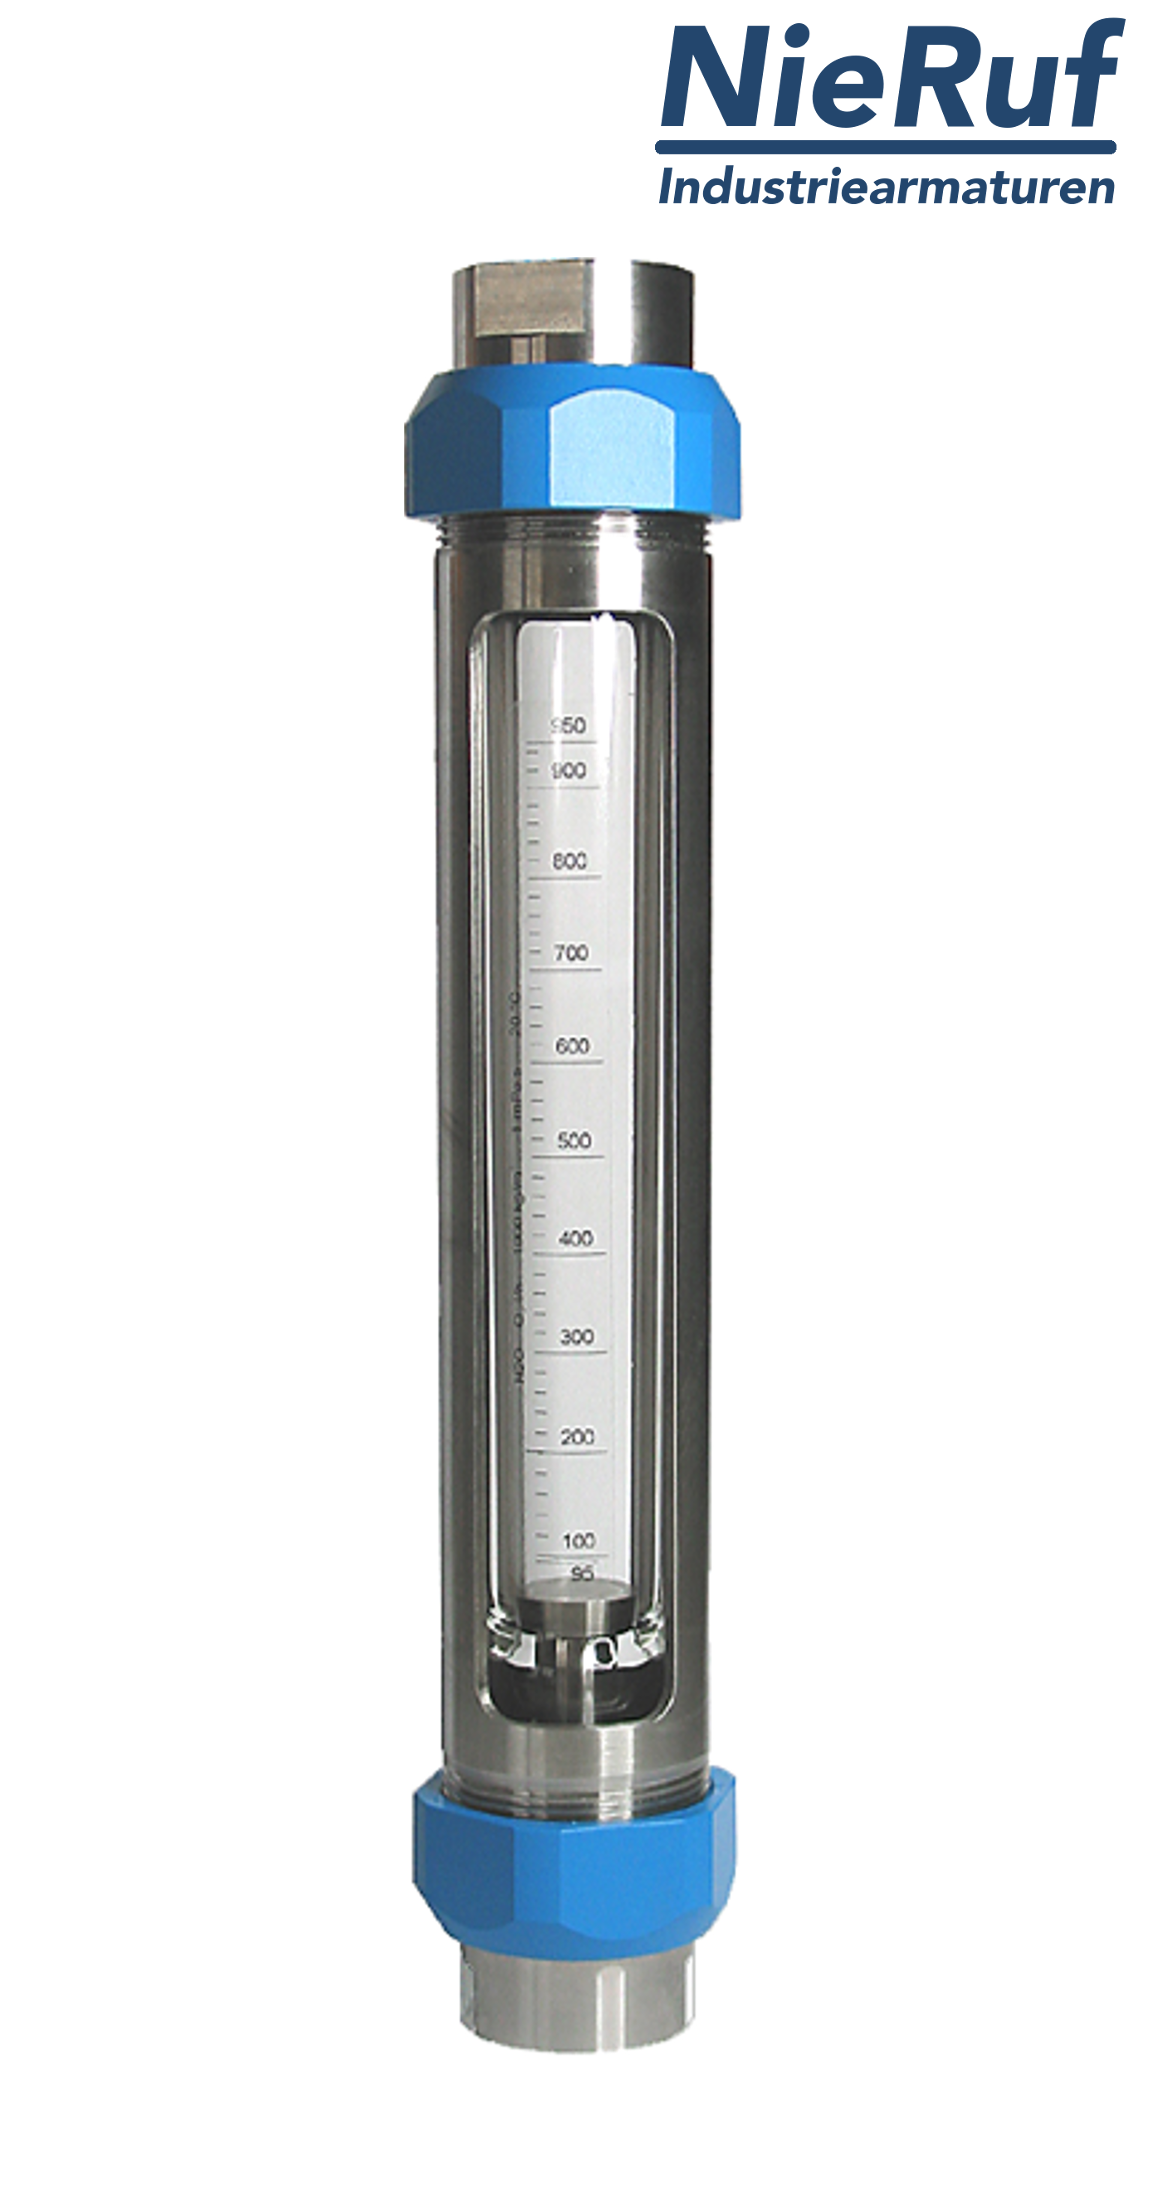 Variable area flowmeter stainless steel + borosilicate 1" inch 80000.0 - 280000.0 l/h air FKM